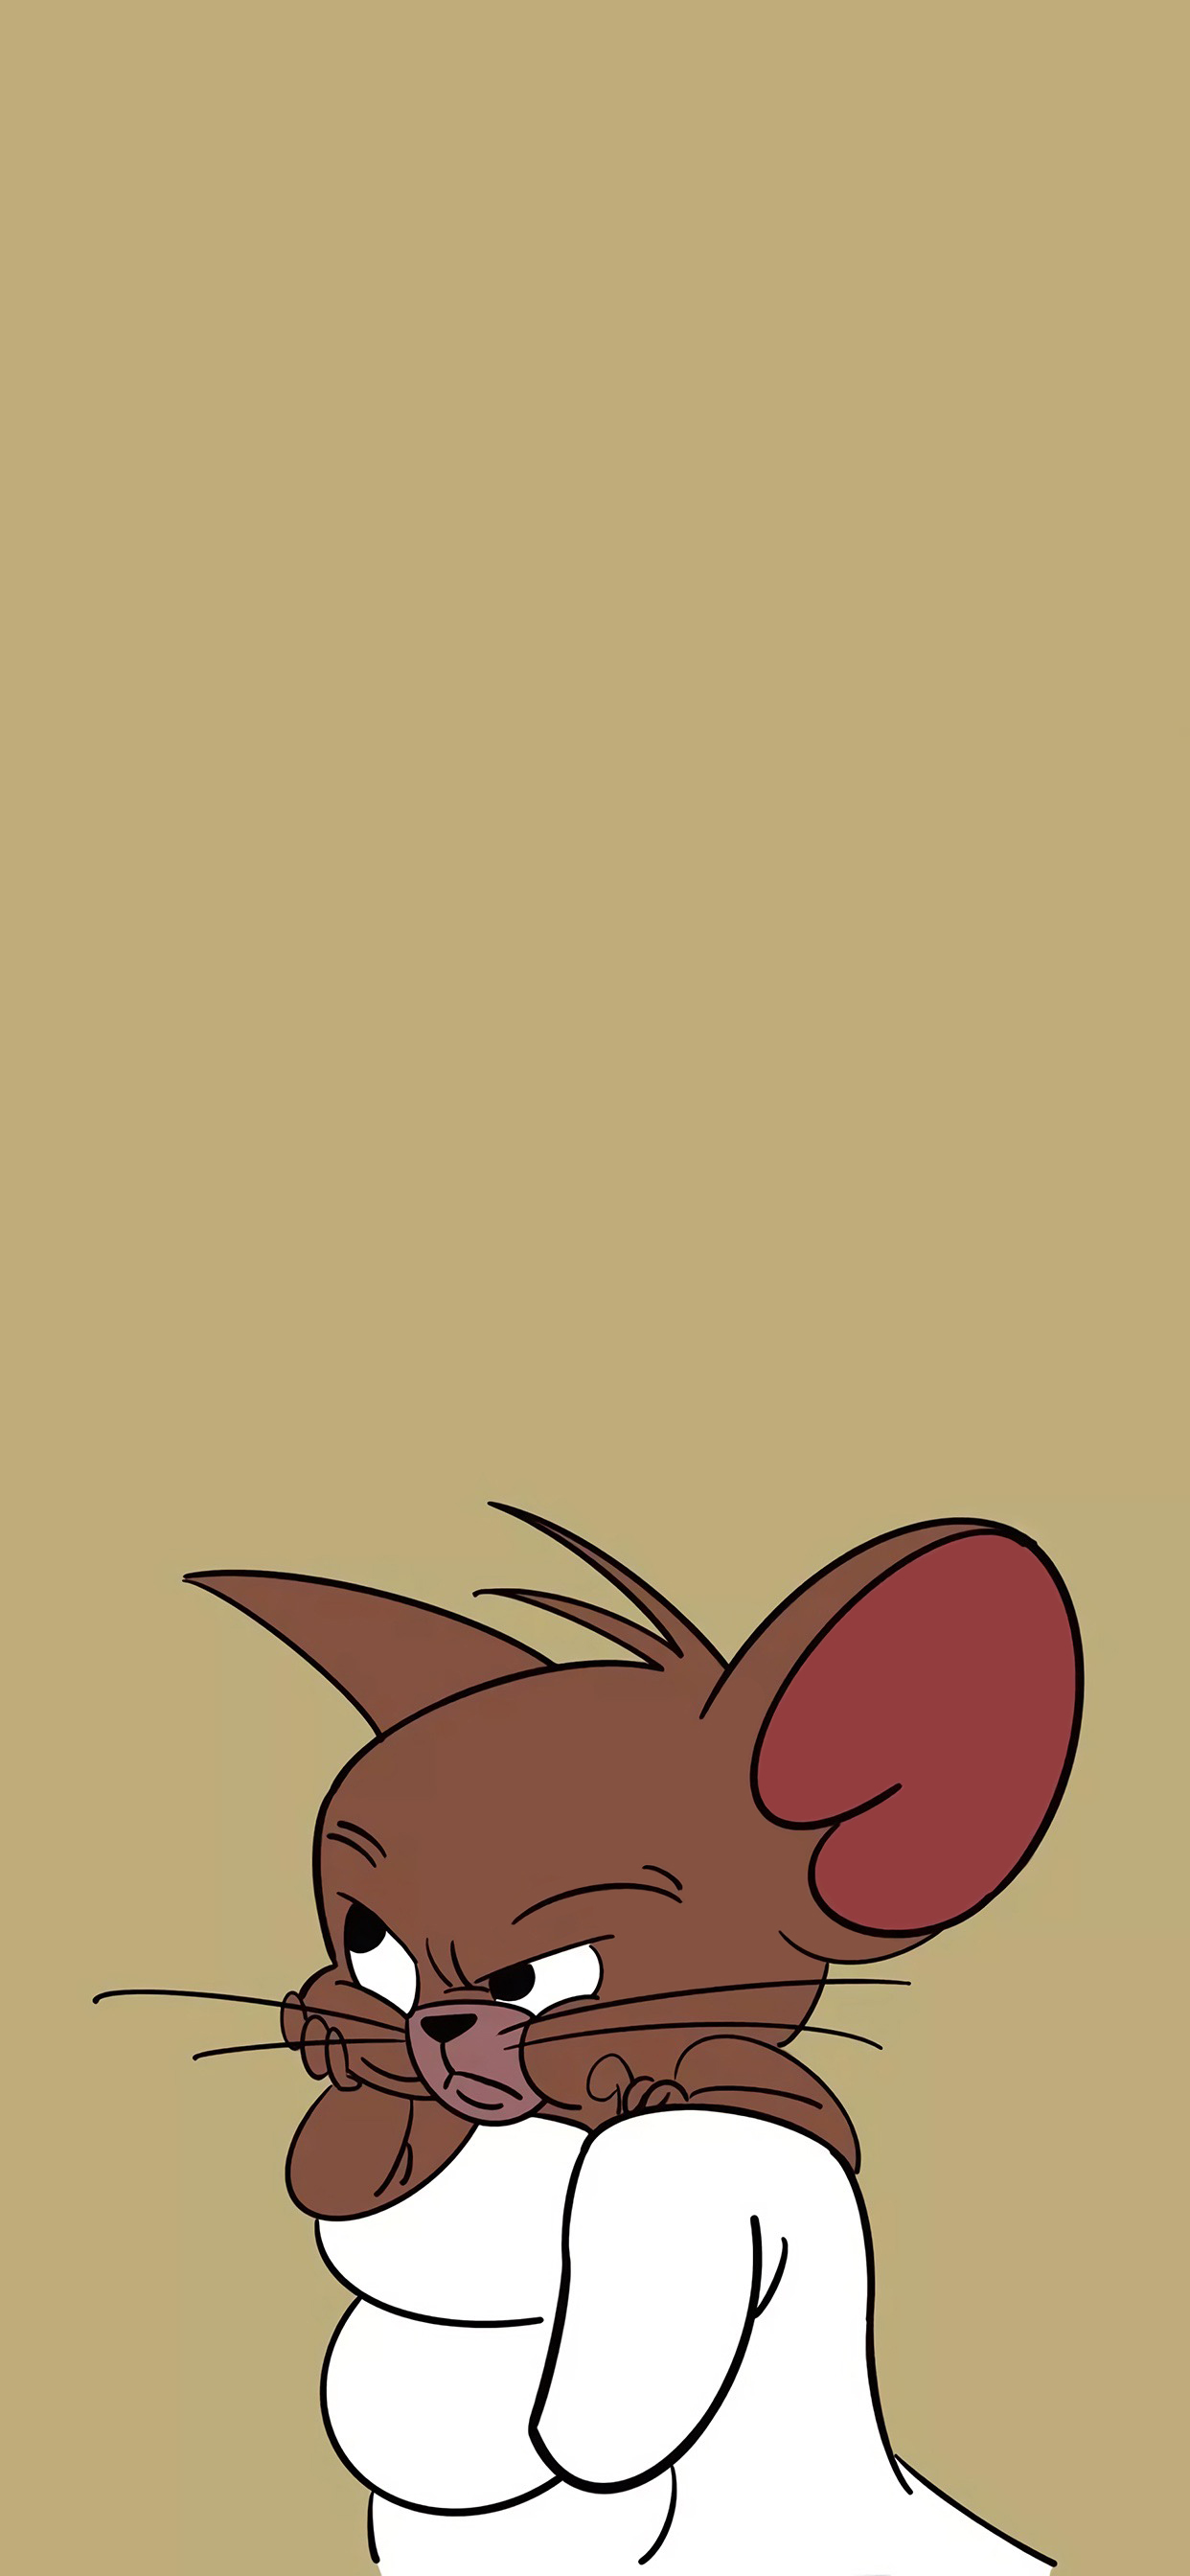 Youa Wallpaper: Classic animation Tom and Jerry wallpaper, a pair of joyful enemies